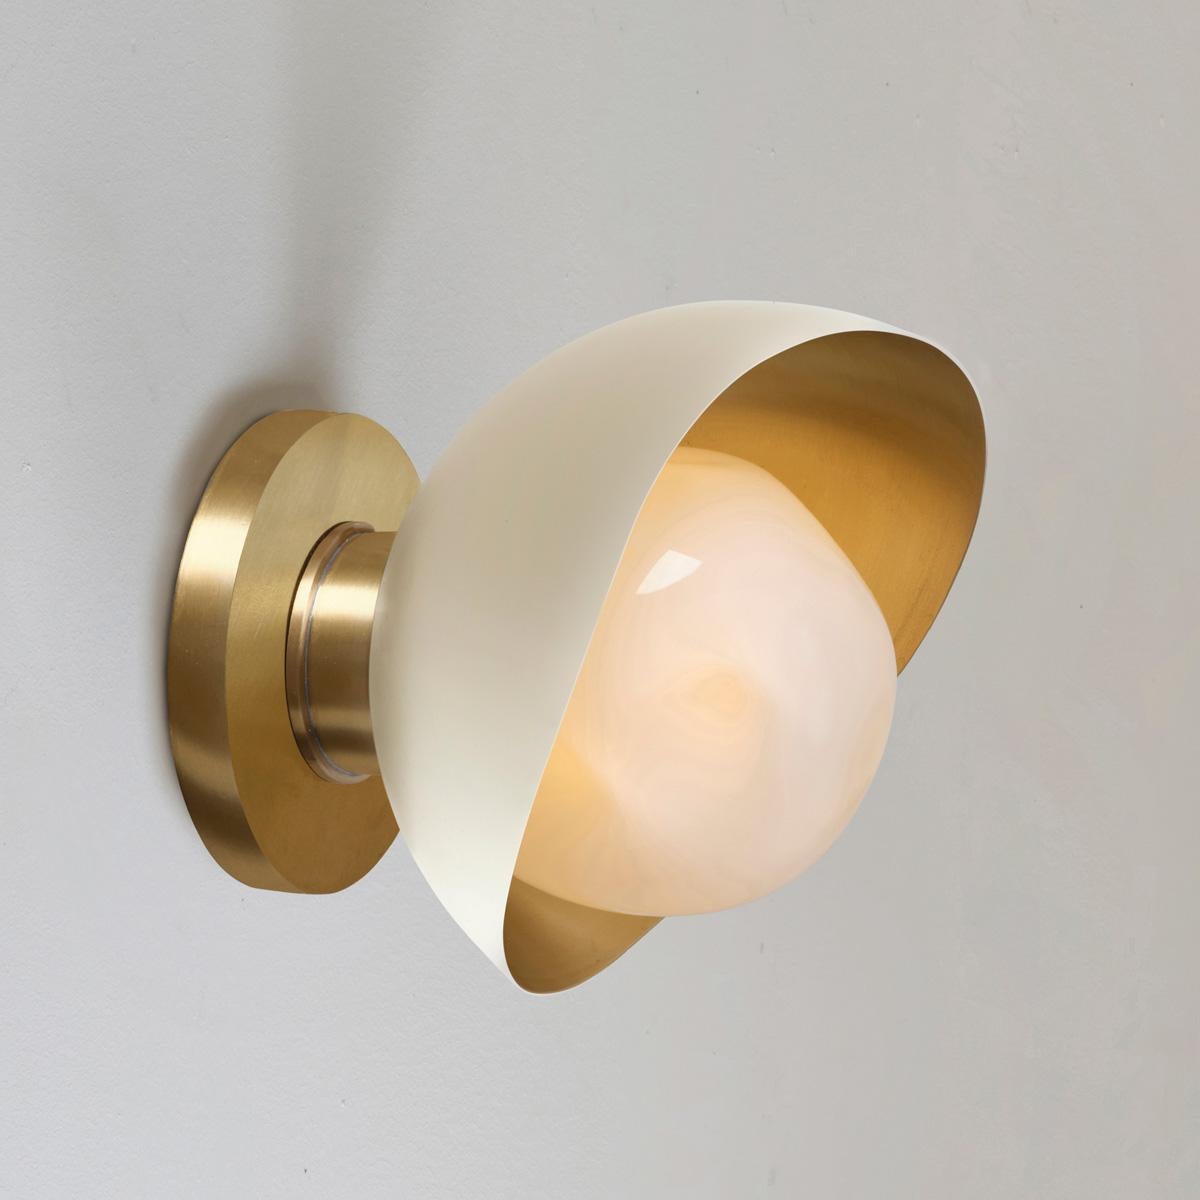 Perla Mini Wall Light by Gaspare Asaro. Bronze and Satin Brass Finish In New Condition For Sale In New York, NY